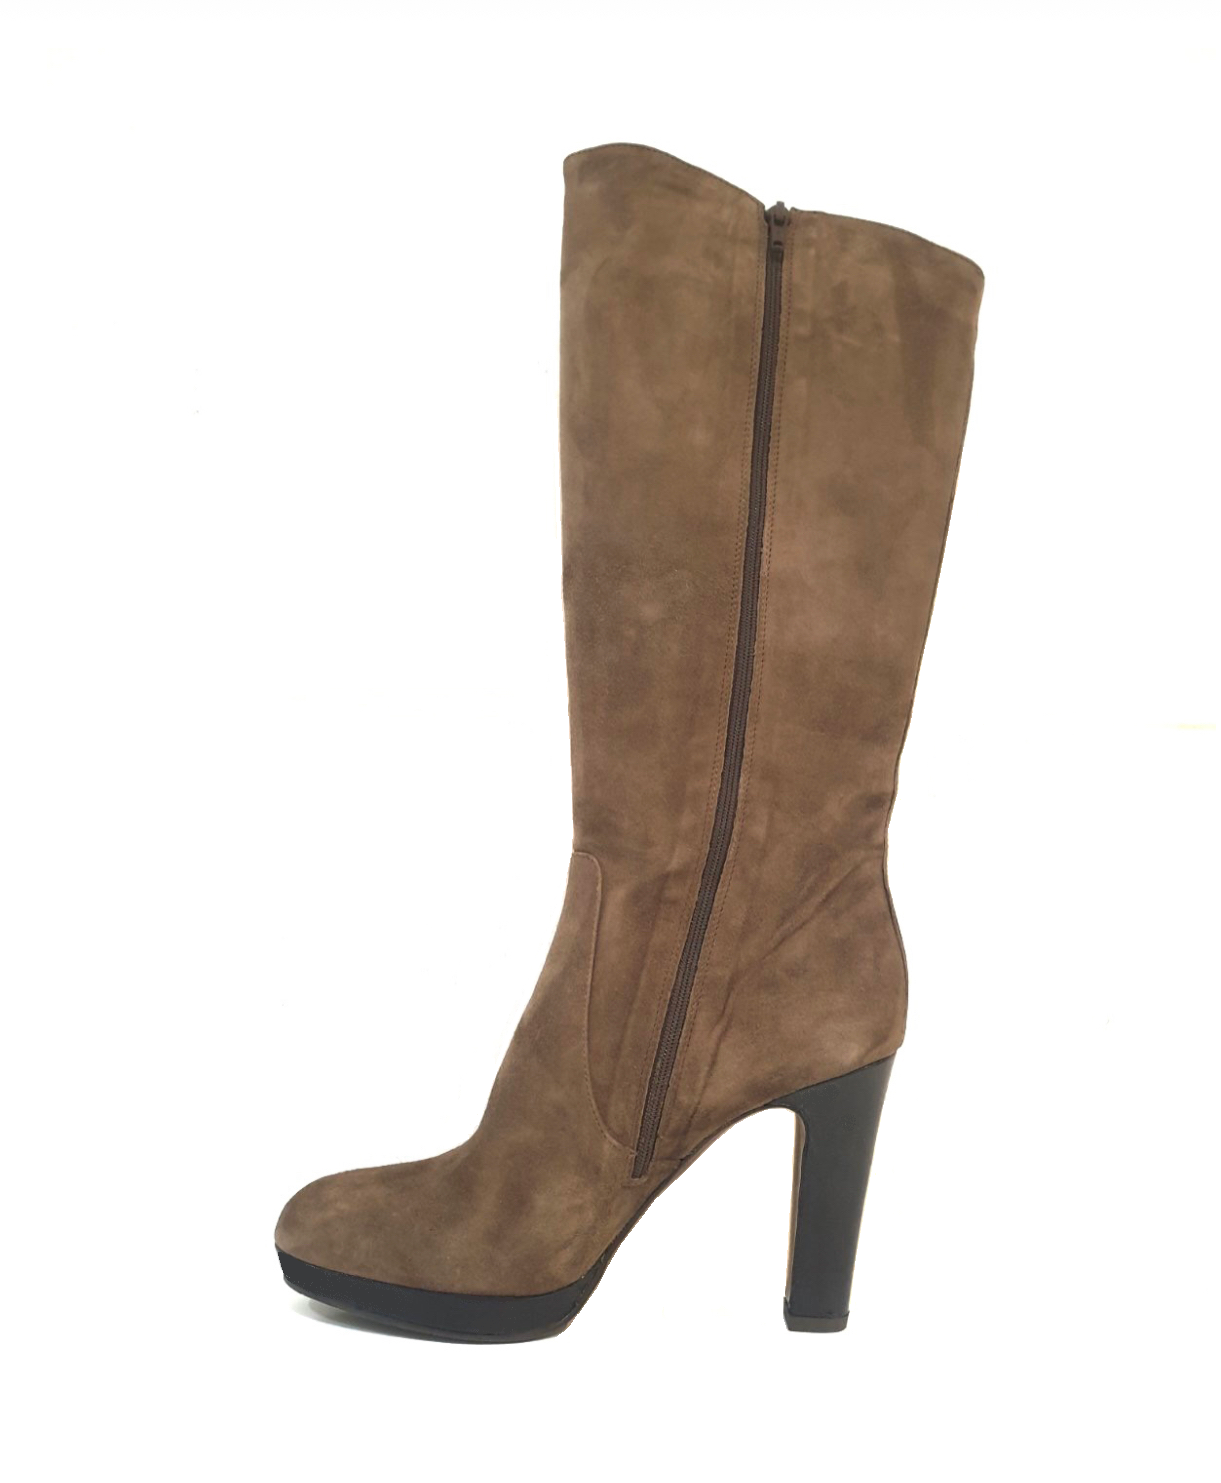 Progetto H296 Camoscio Tun Light Brown Suede Leather Zip Knee High Boot Made In Italy